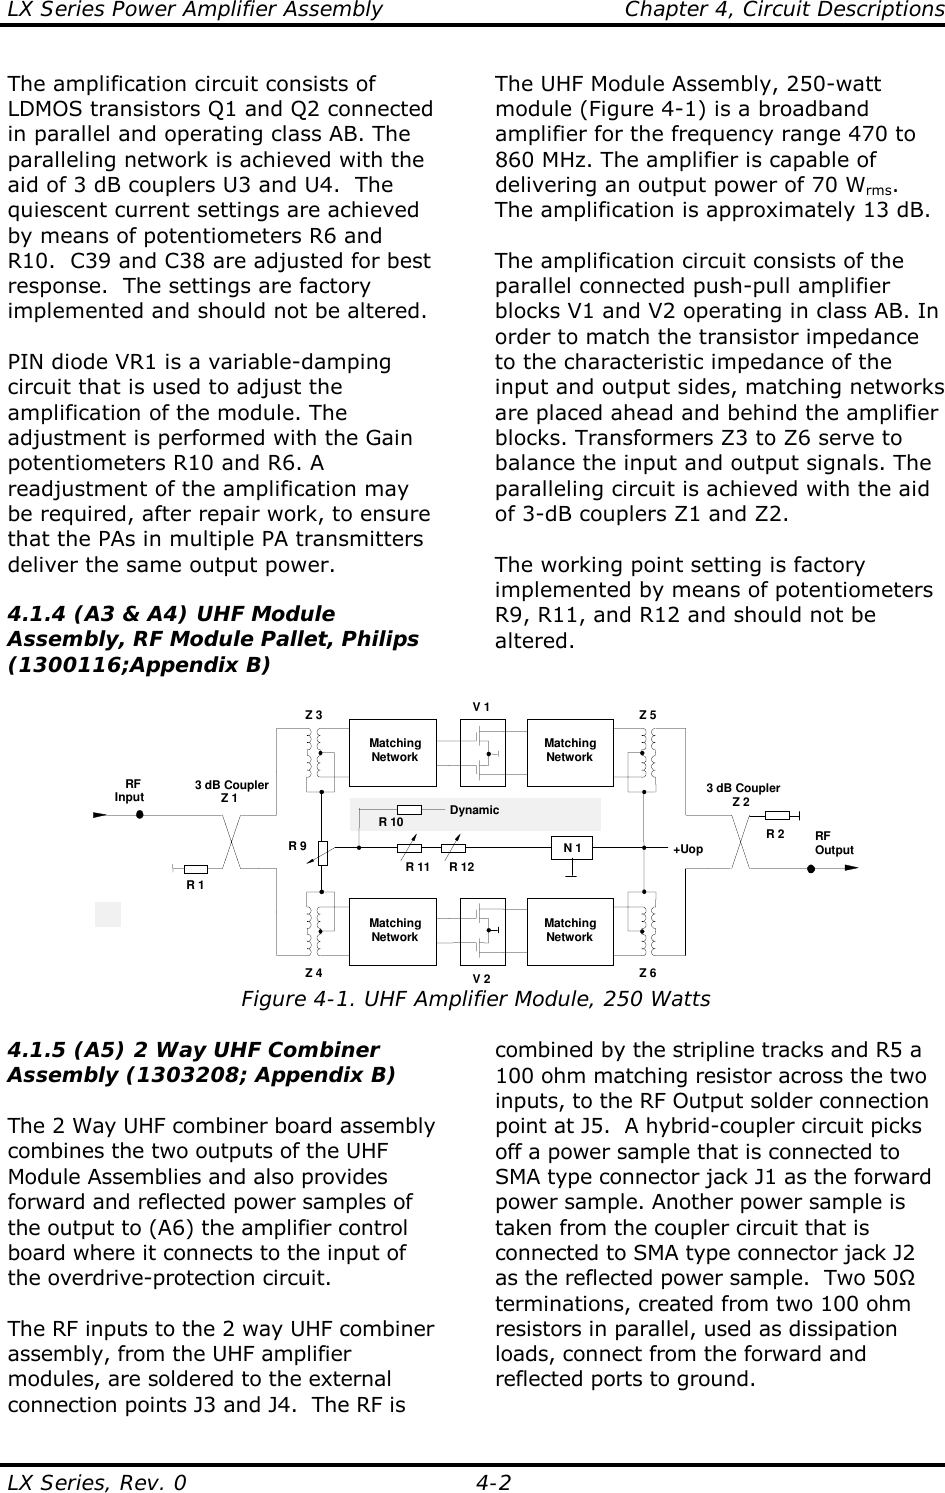 LX Series Power Amplifier Assembly    Chapter 4, Circuit Descriptions LX Series, Rev. 0    4-2 The amplification circuit consists of LDMOS transistors Q1 and Q2 connected in parallel and operating class AB. The paralleling network is achieved with the aid of 3 dB couplers U3 and U4.  The quiescent current settings are achieved by means of potentiometers R6 and R10.  C39 and C38 are adjusted for best response.  The settings are factory implemented and should not be altered.  PIN diode VR1 is a variable-damping circuit that is used to adjust the amplification of the module. The adjustment is performed with the Gain potentiometers R10 and R6. A readjustment of the amplification may be required, after repair work, to ensure that the PAs in multiple PA transmitters deliver the same output power.  4.1.4 (A3 &amp; A4) UHF Module Assembly, RF Module Pallet, Philips (1300116;Appendix B)  The UHF Module Assembly, 250-watt module (Figure 4-1) is a broadband amplifier for the frequency range 470 to 860 MHz. The amplifier is capable of delivering an output power of 70 Wrms. The amplification is approximately 13 dB.  The amplification circuit consists of the parallel connected push-pull amplifier blocks V1 and V2 operating in class AB. In order to match the transistor impedance to the characteristic impedance of the input and output sides, matching networks are placed ahead and behind the amplifier blocks. Transformers Z3 to Z6 serve to balance the input and output signals. The paralleling circuit is achieved with the aid of 3-dB couplers Z1 and Z2.  The working point setting is factory implemented by means of potentiometers R9, R11, and R12 and should not be altered.  V 13 dB CouplerZ 2RFOutputRFInput 3 dB CouplerZ 1R 2R 1MatchingNetworkMatchingNetworkV 2MatchingNetworkMatchingNetworkZ 3 Z 5Z 4 Z 6+UopN 1R 11 R 12R 9R 10 Dynamic Figure 4-1. UHF Amplifier Module, 250 Watts 4.1.5 (A5) 2 Way UHF Combiner Assembly (1303208; Appendix B)  The 2 Way UHF combiner board assembly combines the two outputs of the UHF Module Assemblies and also provides forward and reflected power samples of the output to (A6) the amplifier control board where it connects to the input of the overdrive-protection circuit.  The RF inputs to the 2 way UHF combiner assembly, from the UHF amplifier modules, are soldered to the external connection points J3 and J4.  The RF is combined by the stripline tracks and R5 a 100 ohm matching resistor across the two inputs, to the RF Output solder connection point at J5.  A hybrid-coupler circuit picks off a power sample that is connected to SMA type connector jack J1 as the forward power sample. Another power sample is taken from the coupler circuit that is connected to SMA type connector jack J2 as the reflected power sample.  Two 50Ω terminations, created from two 100 ohm resistors in parallel, used as dissipation loads, connect from the forward and reflected ports to ground.  